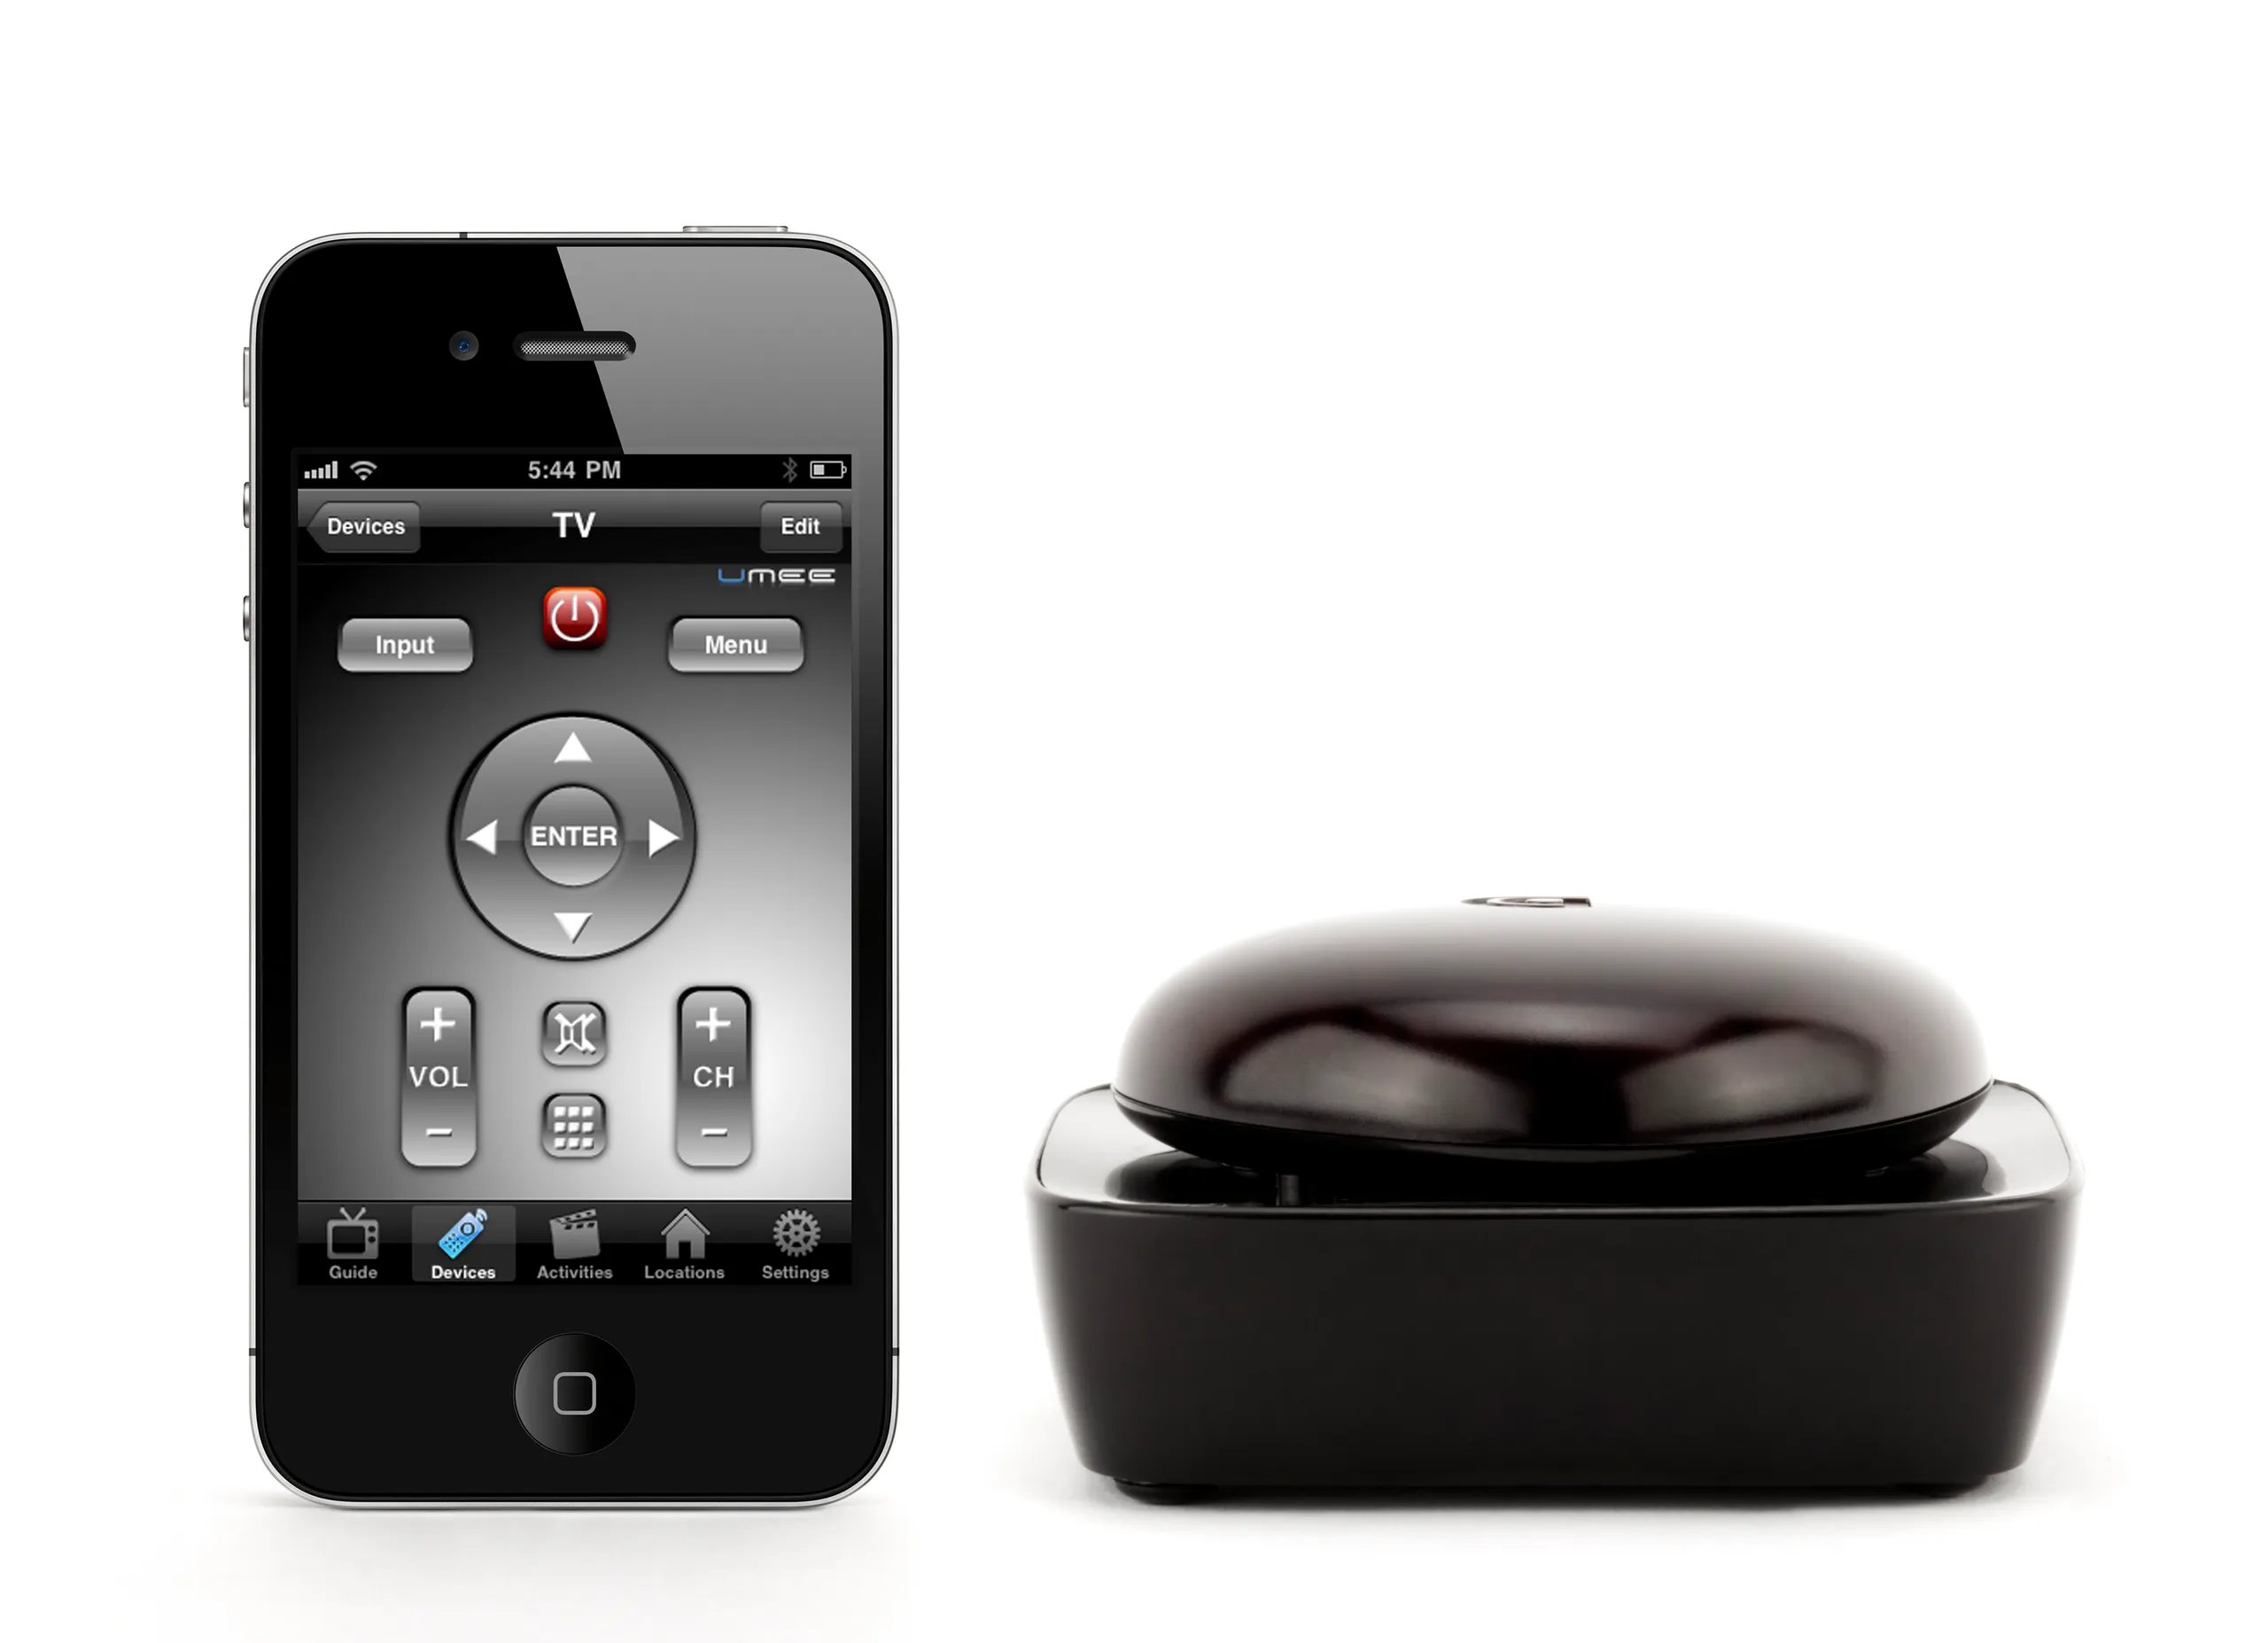 griffin-and-dijit-turn-ipad-or-iphone-into-a-universal-remote